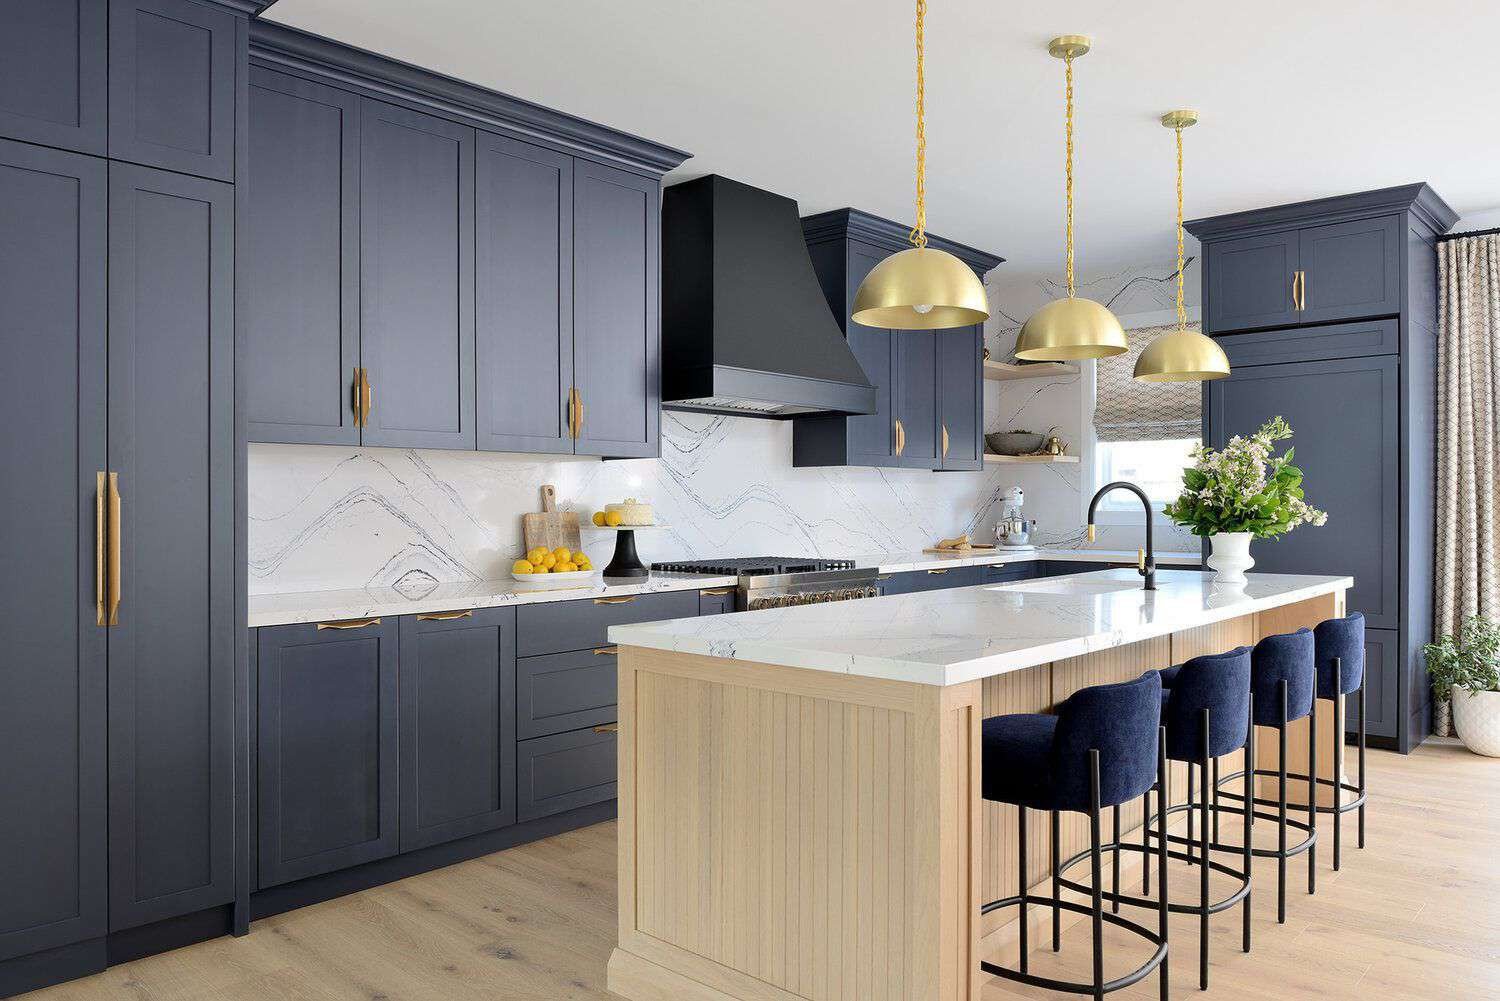 25 Navy Kitchen Cabinet Ideas To Refresh Your Space pertaining to Navy Blue Kitchen Cabinets